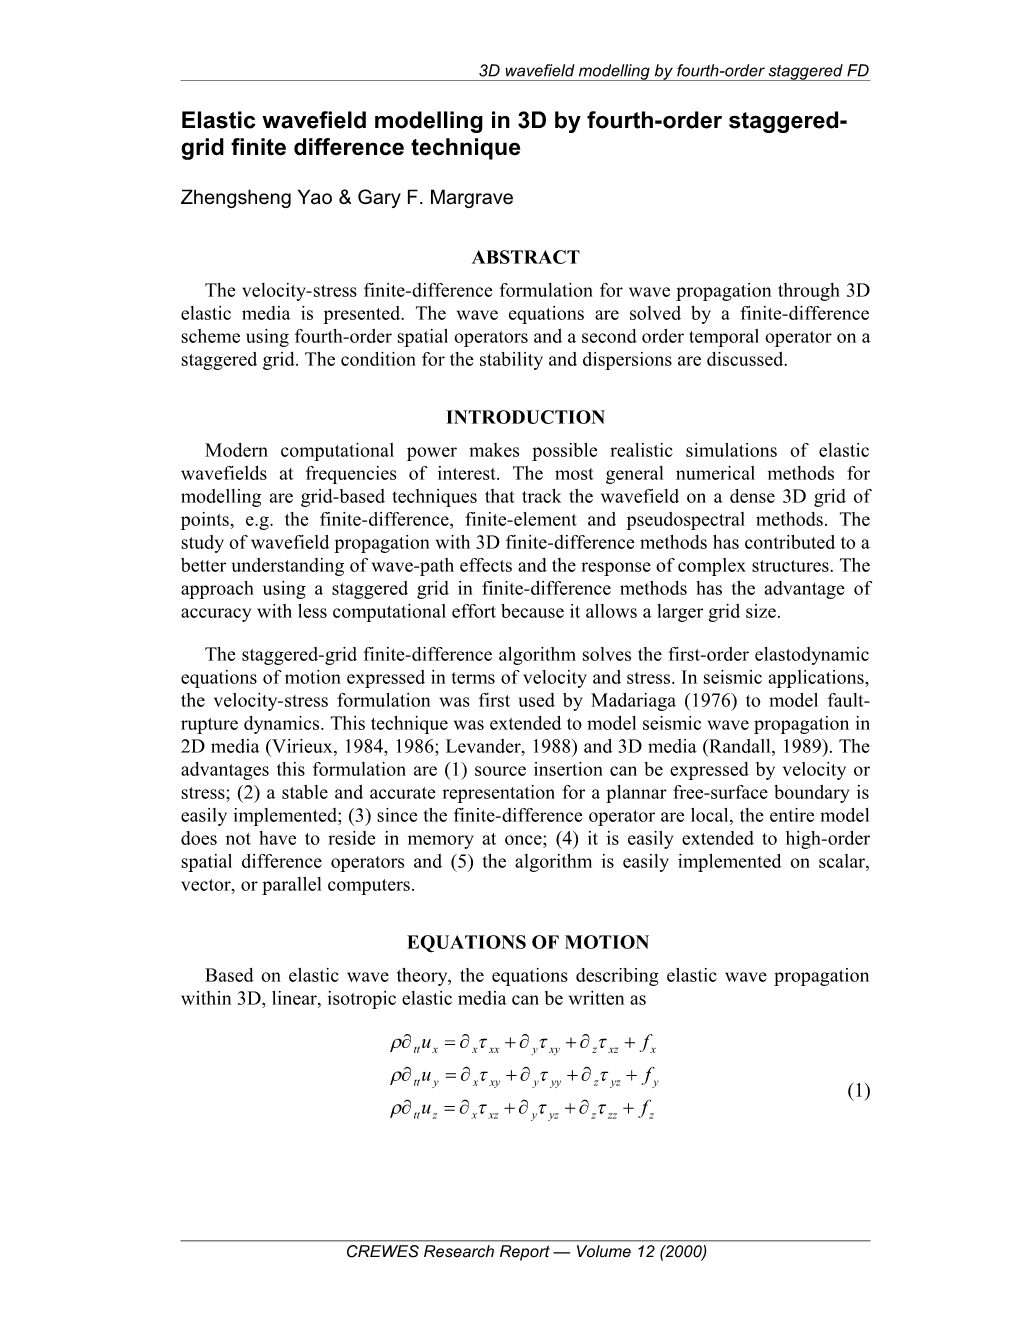 3D Wavefield Modeling by Fourth-Order Staggered Grid Finite Difference